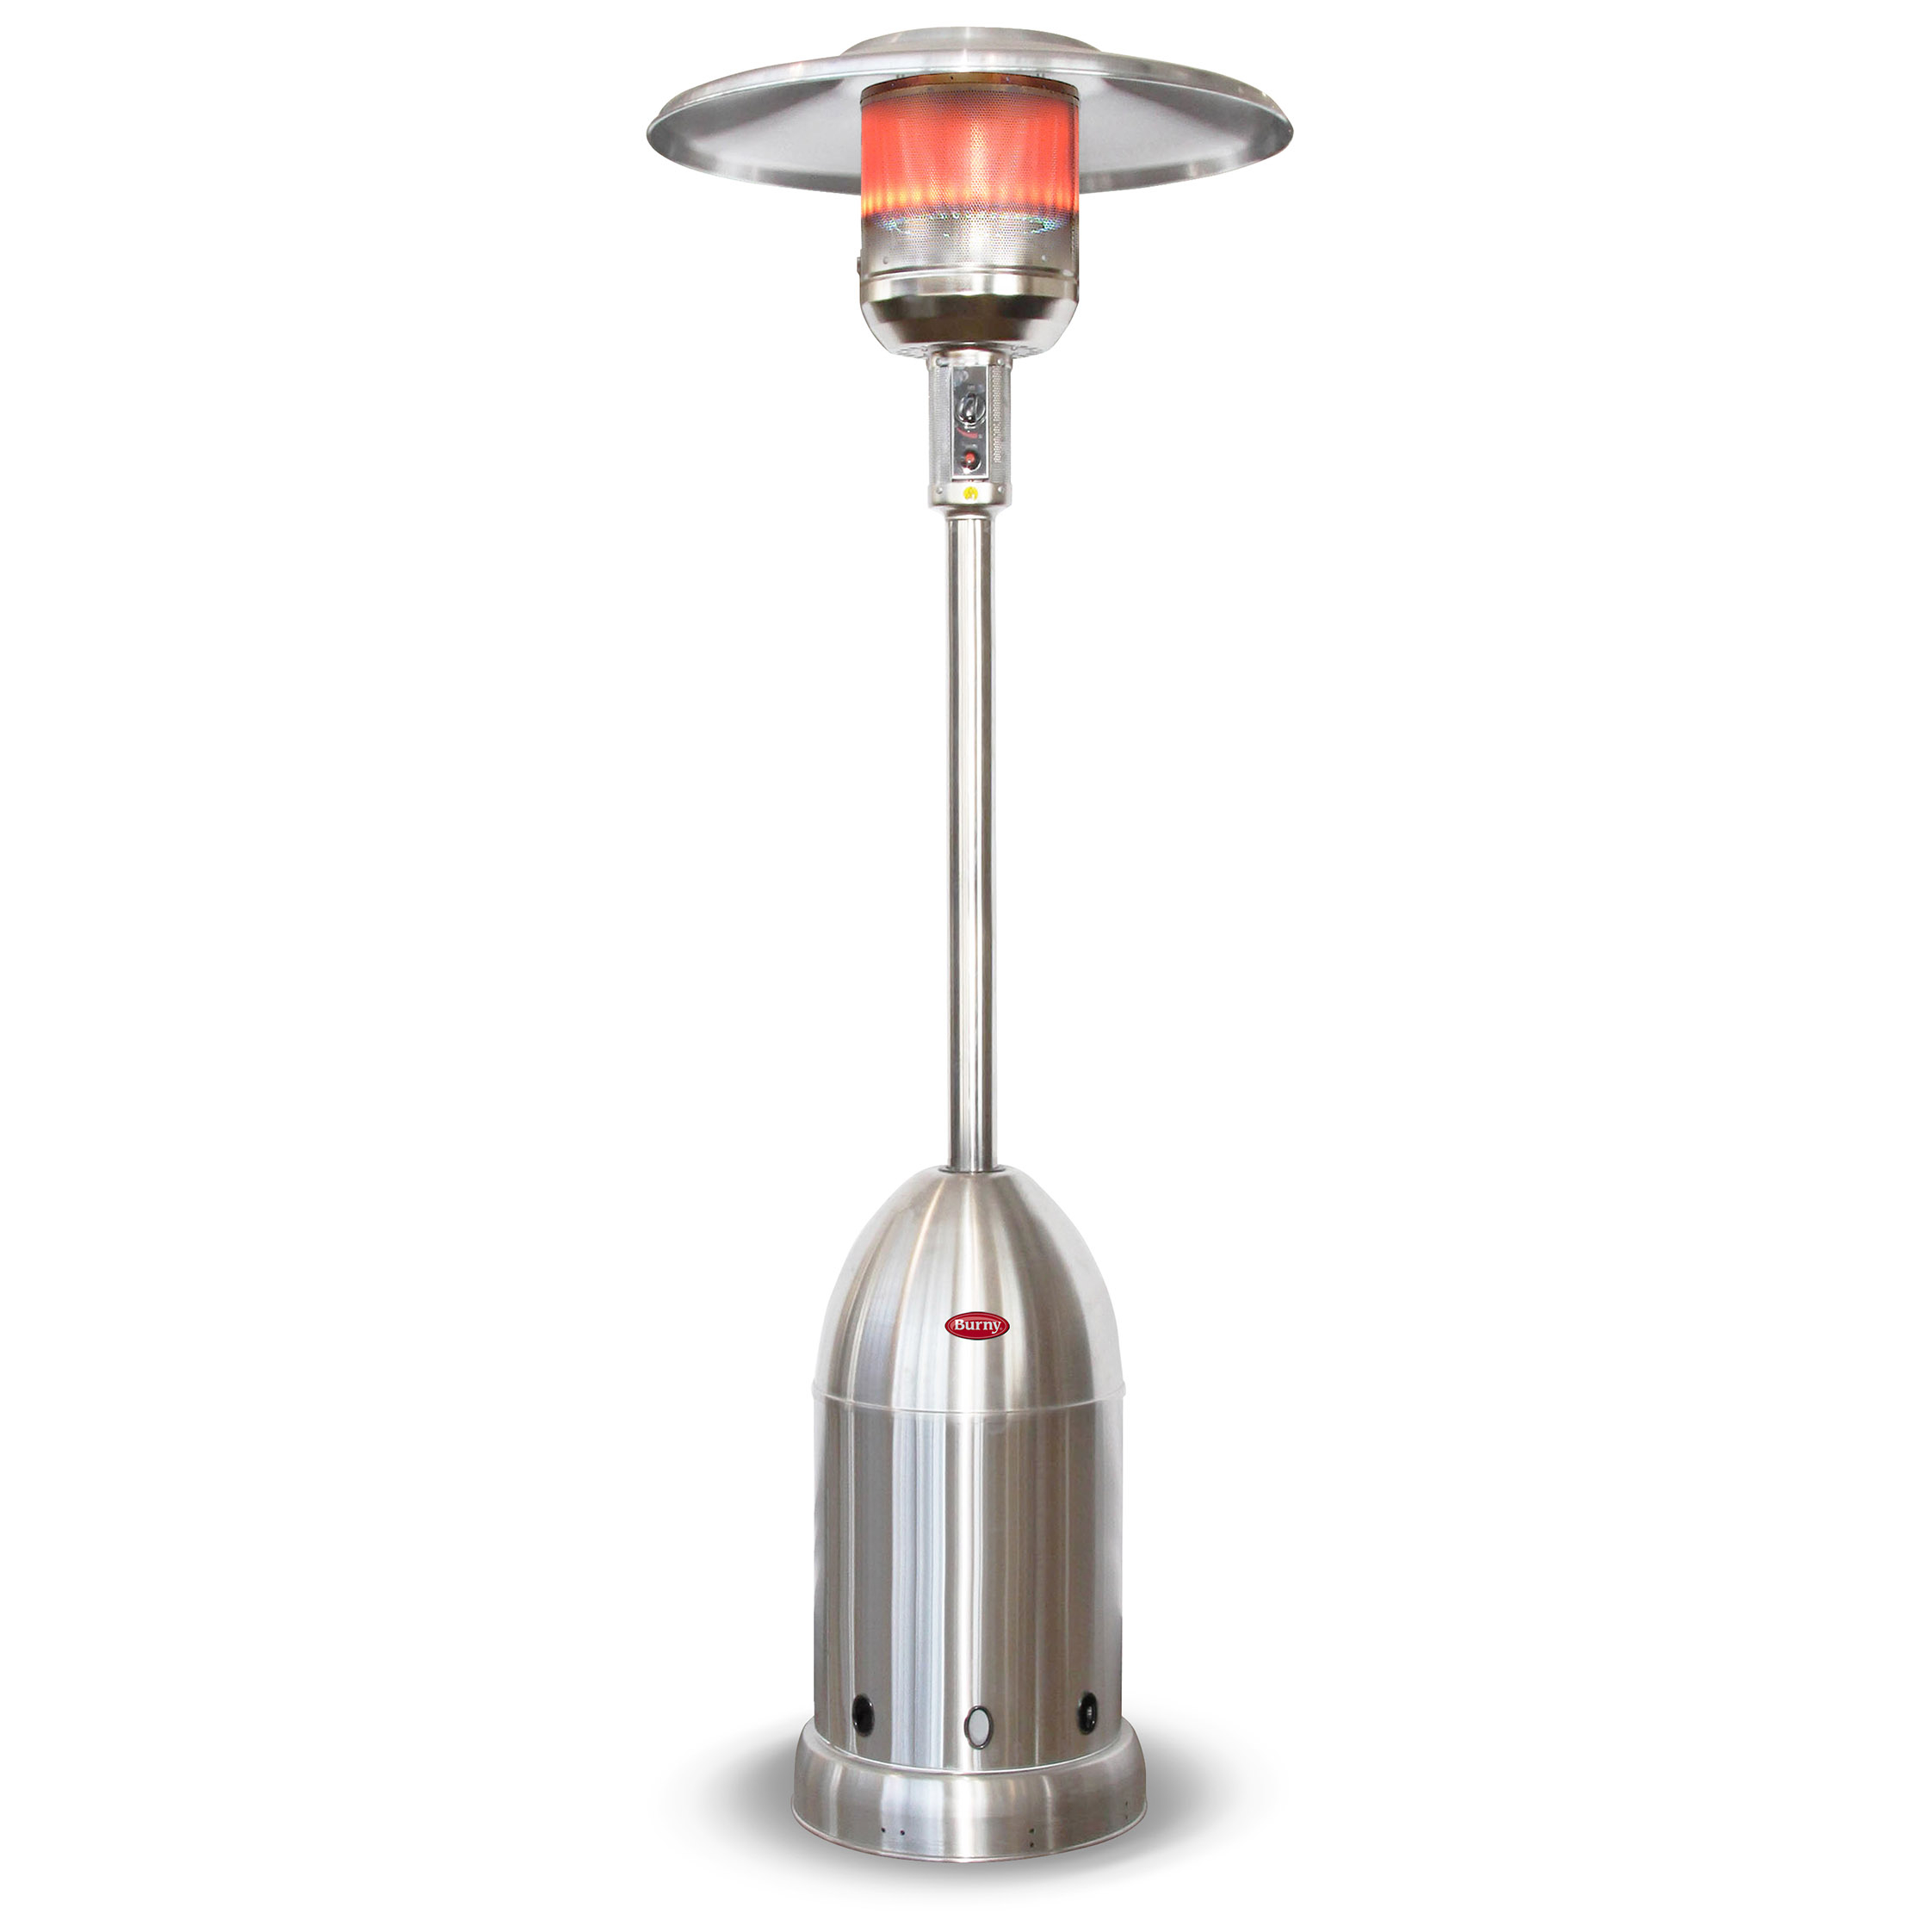 Burny Classical Burner Stainless Steel Gas Heater 2940 throughout measurements 2244 X 2244